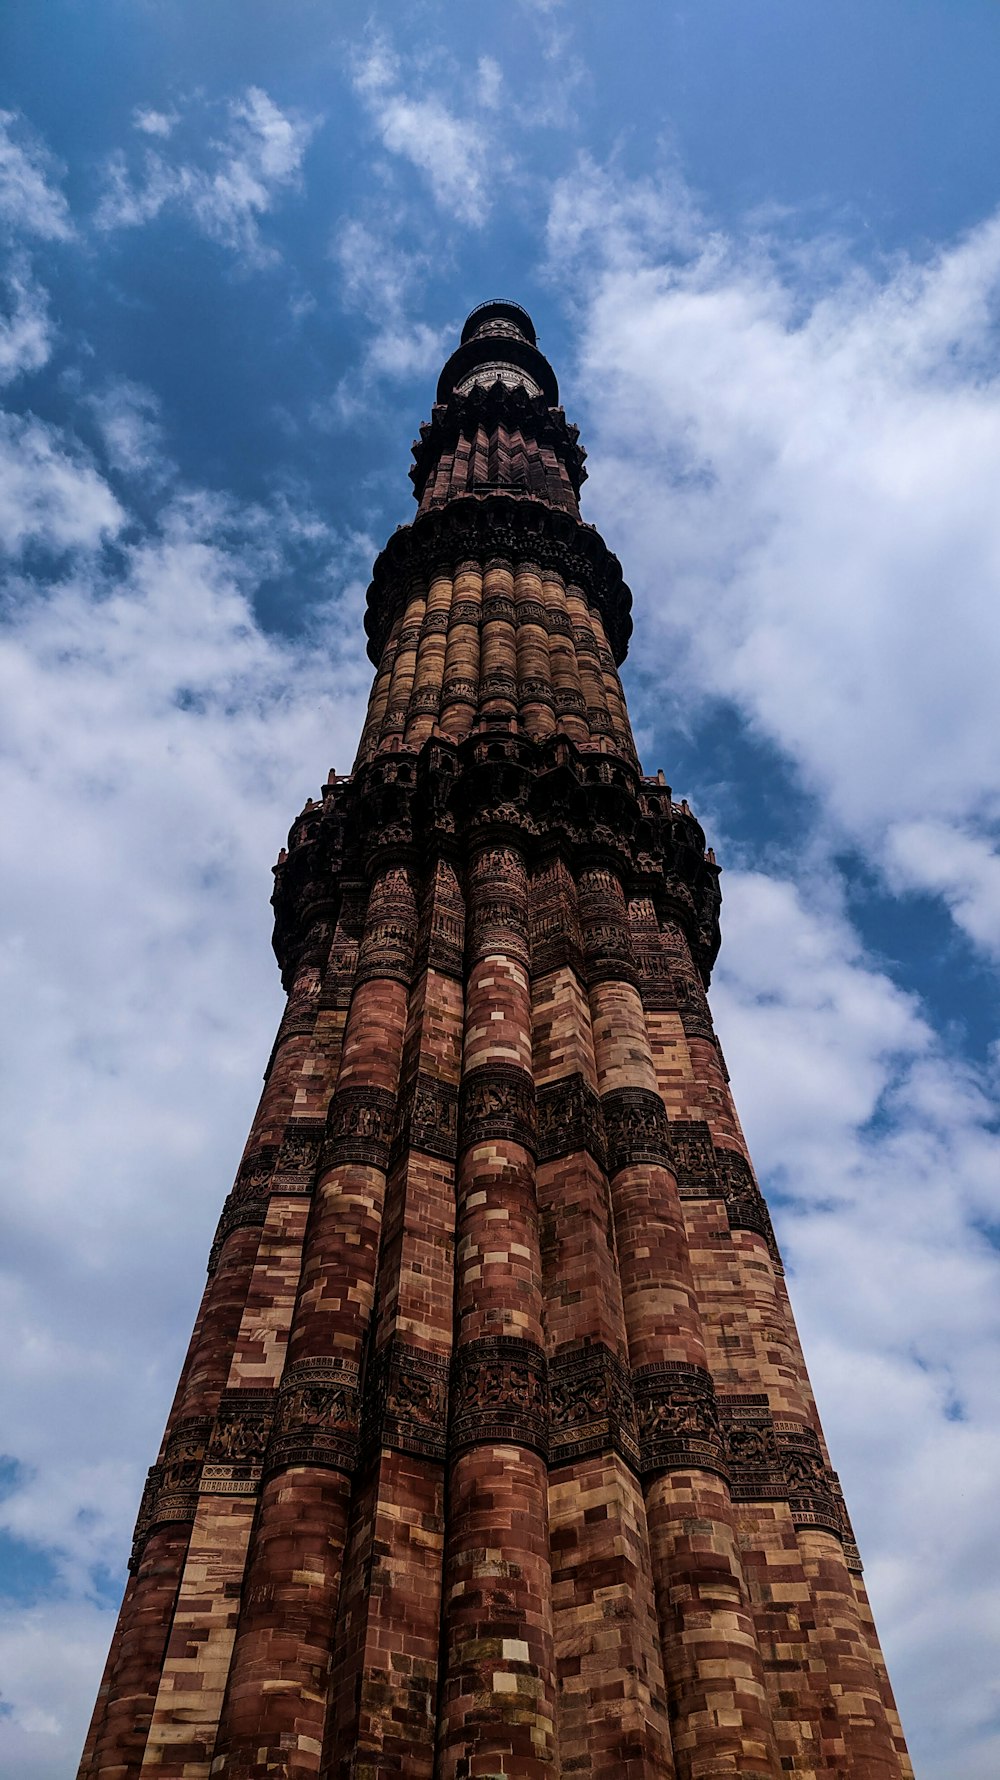 brown and black tower under cloudy sky